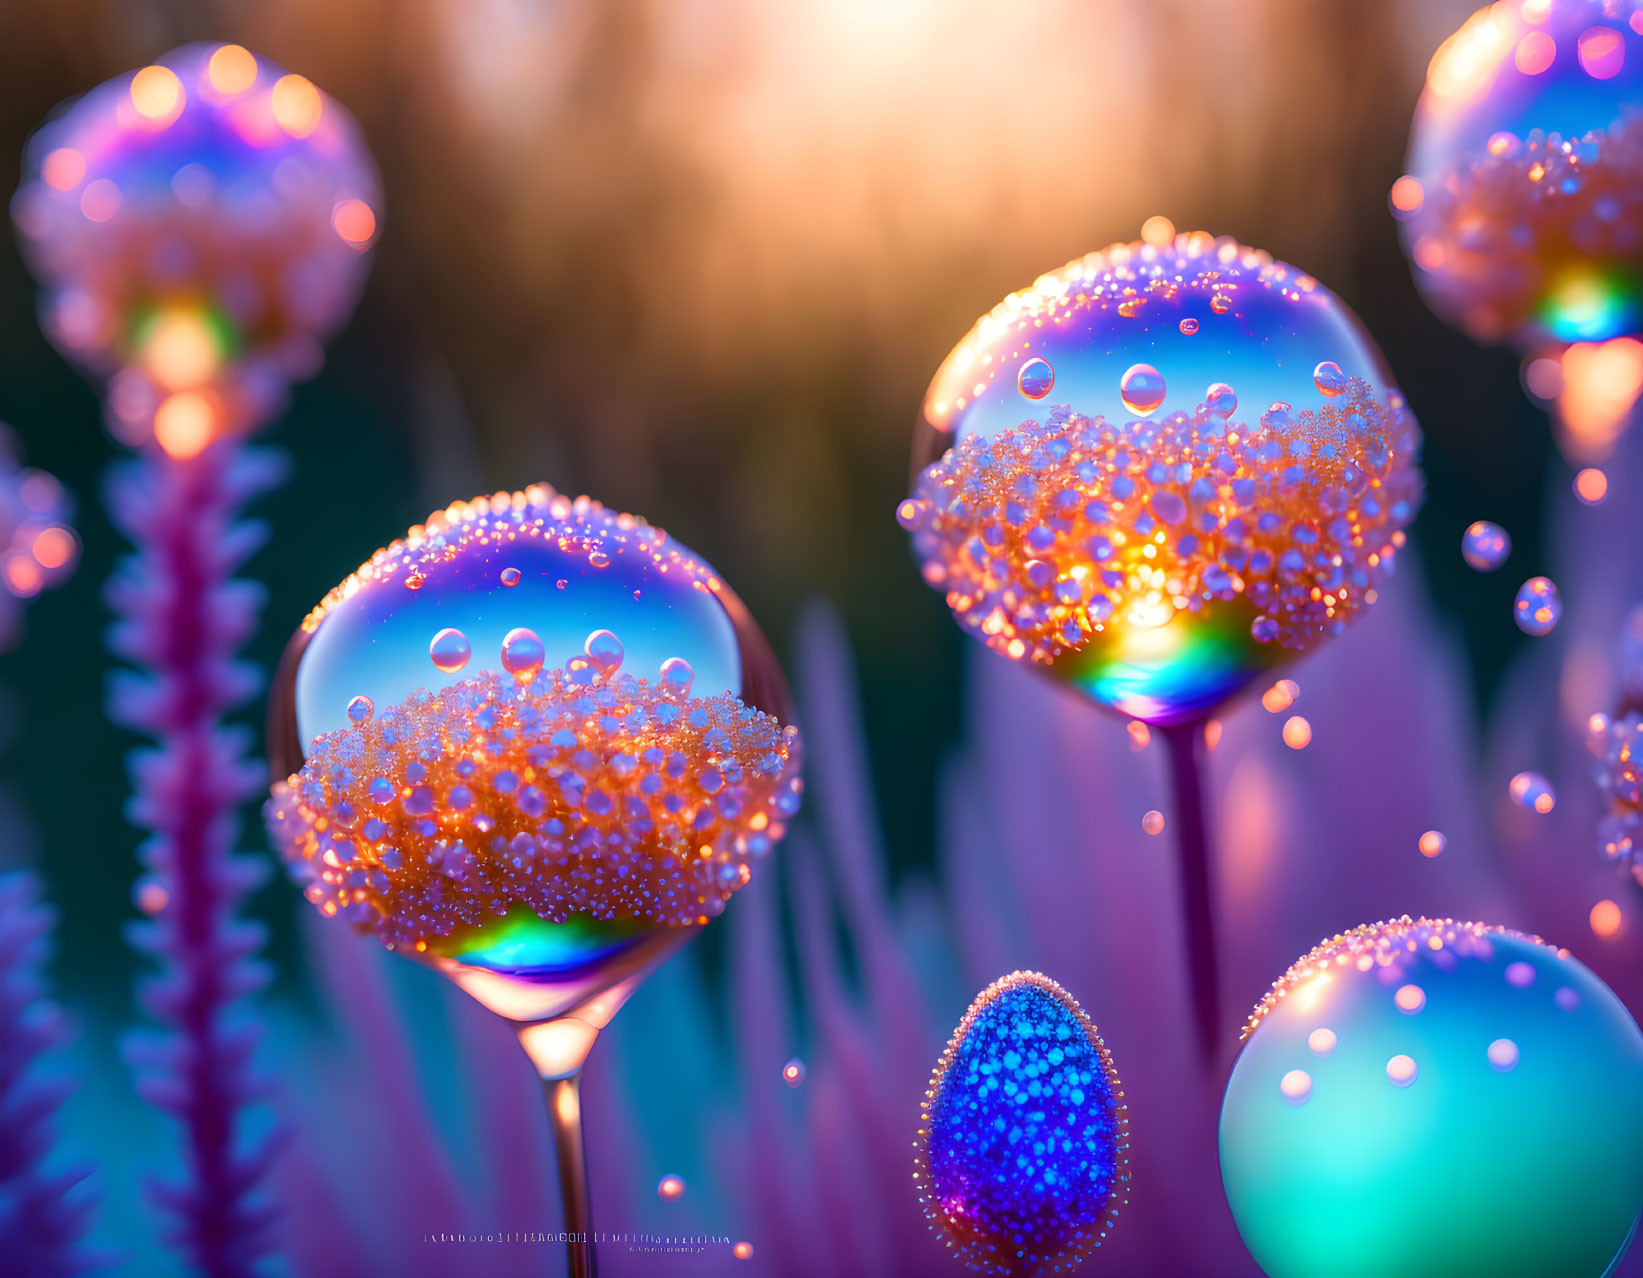 Fantasy-inspired image of glowing bubble-like plants on colorful bokeh background